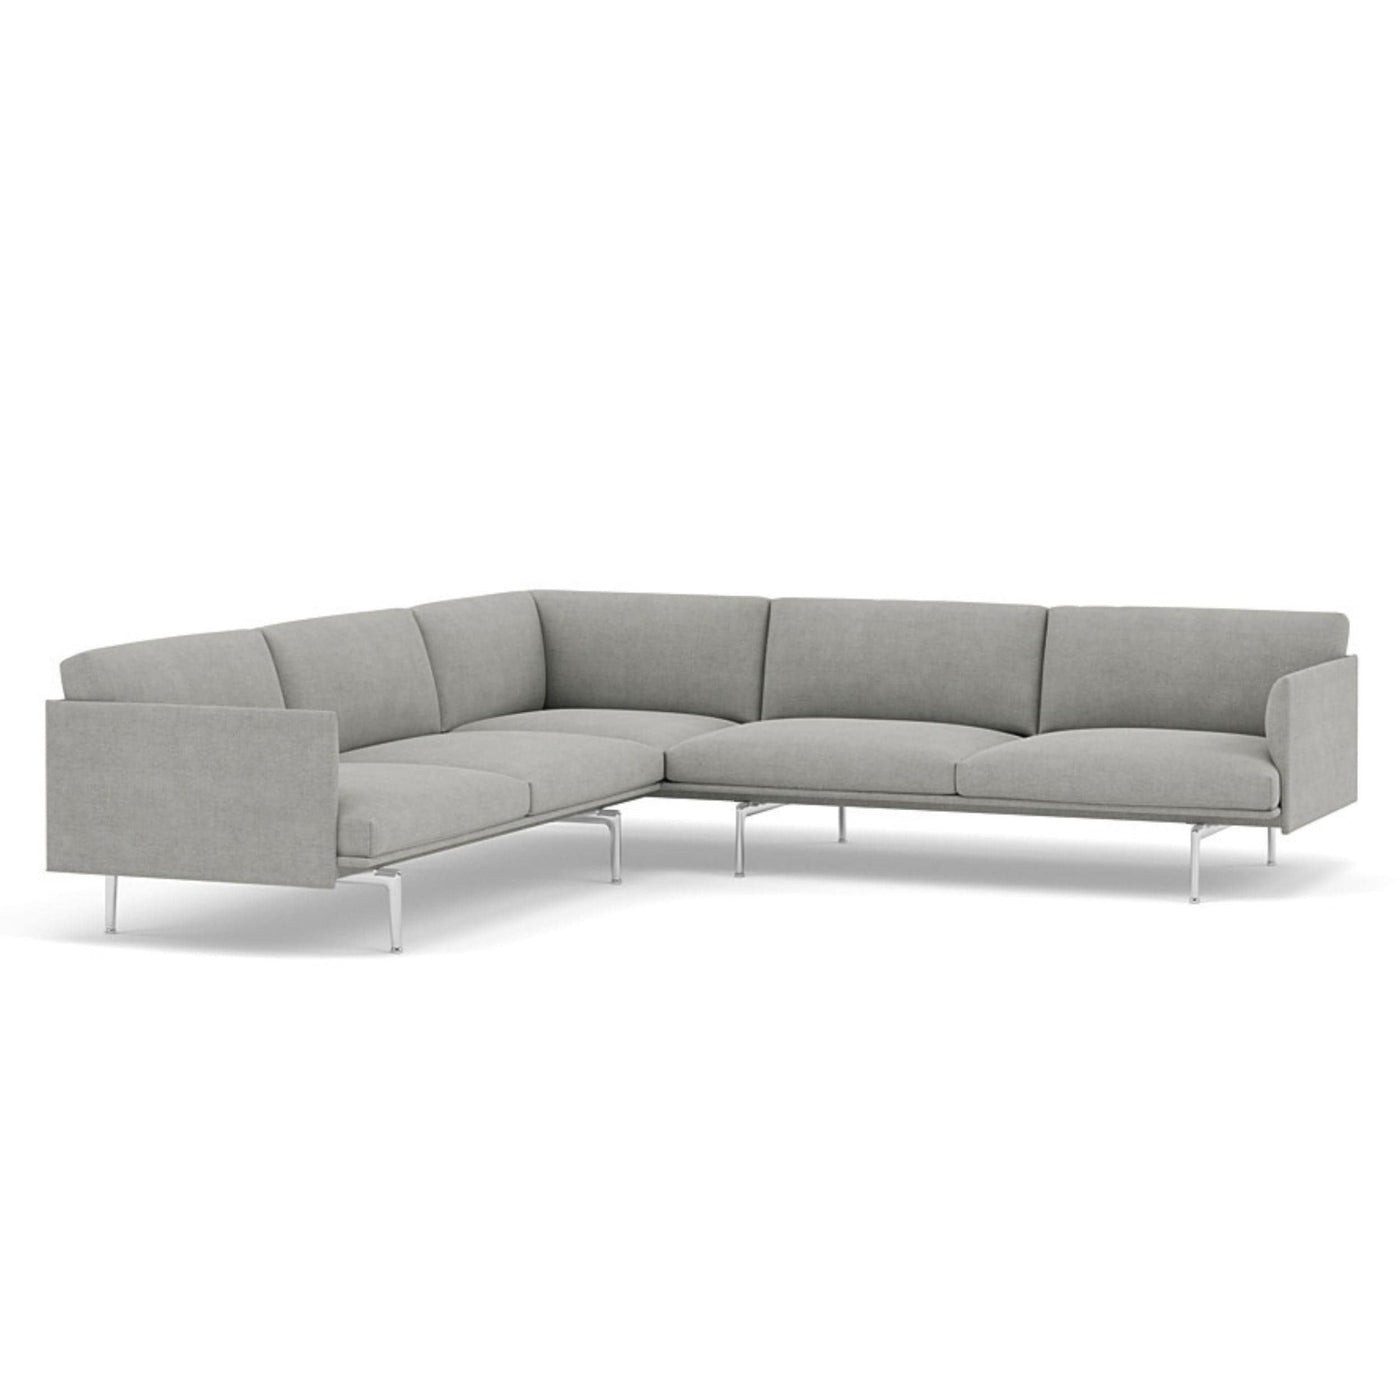 muuto outline corner sofa in fiord 151 grey fabric and polished aluminium legs. Made to order from someday designs. #colour_fiord-151